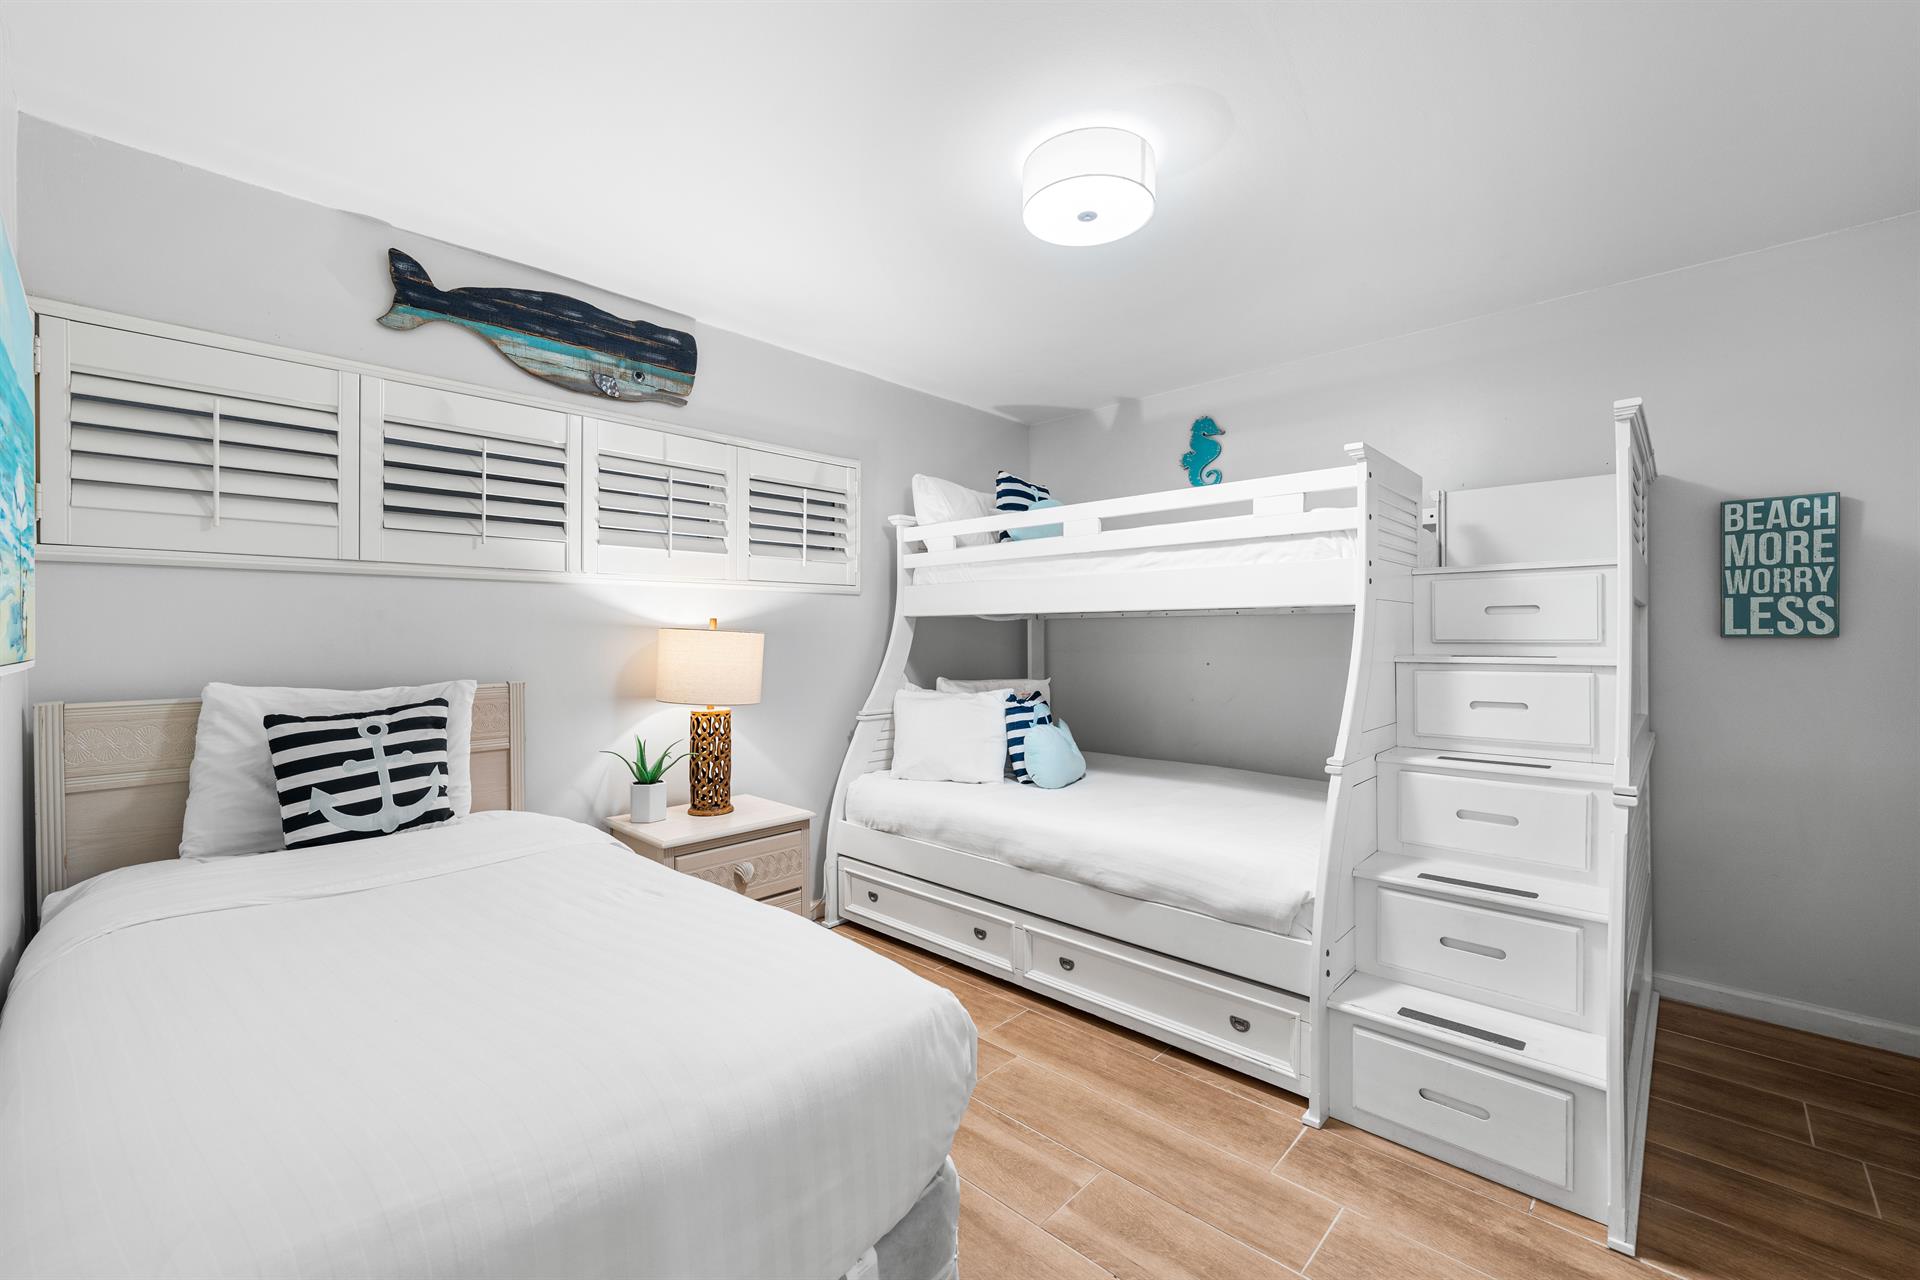 HSRC 105 Second Bedroom With Twin Bed, Bunk Beds, And Trundle